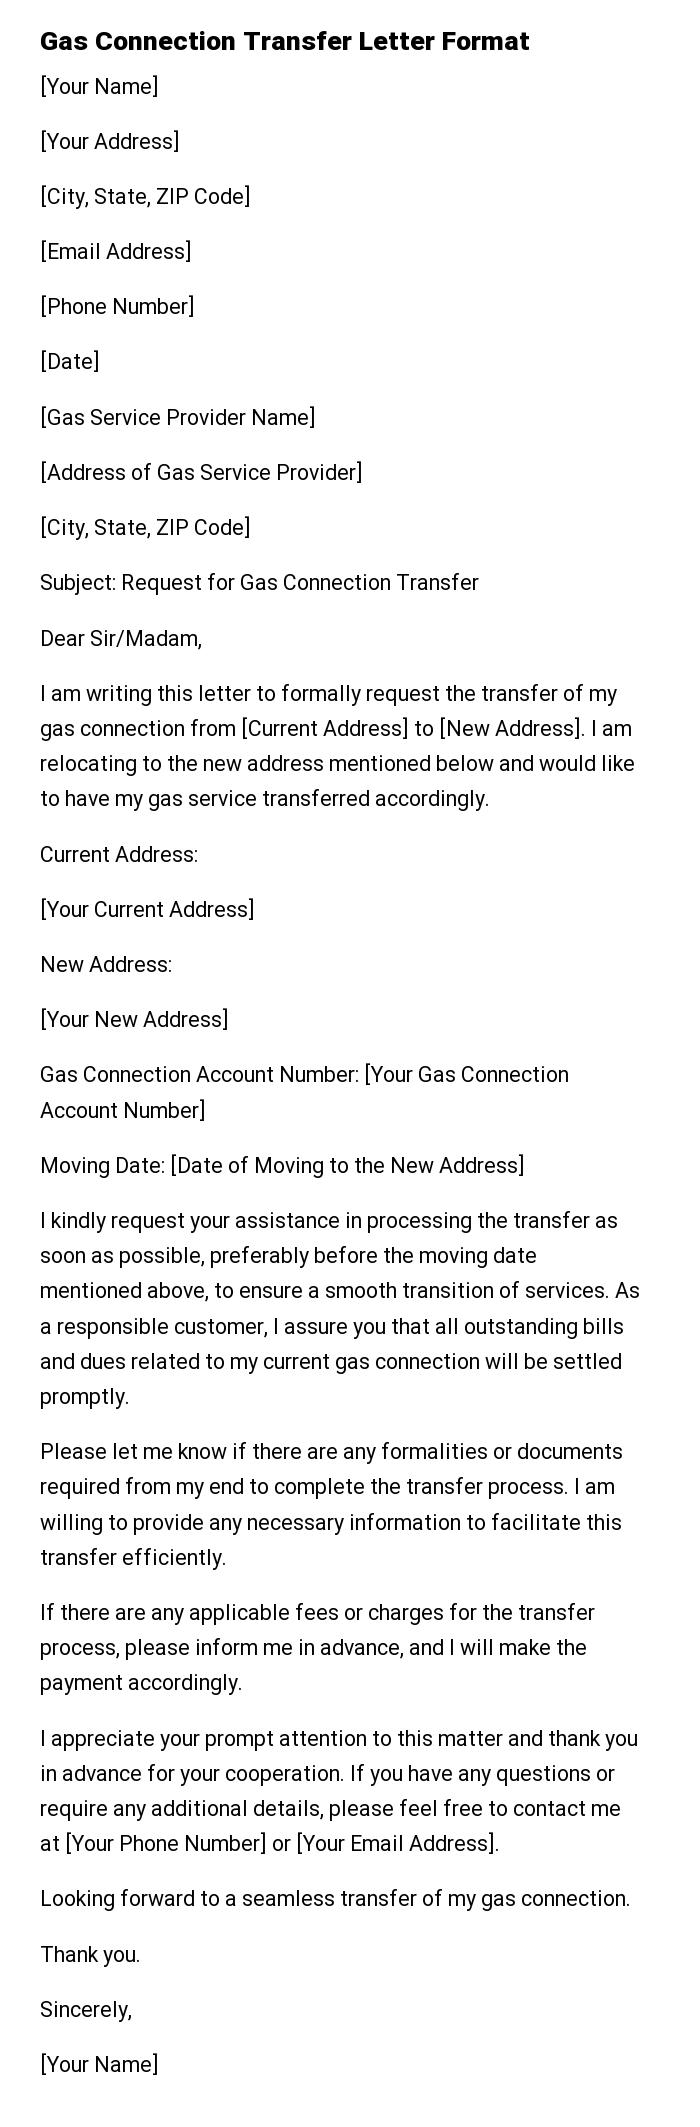 Gas Connection Transfer Letter Format